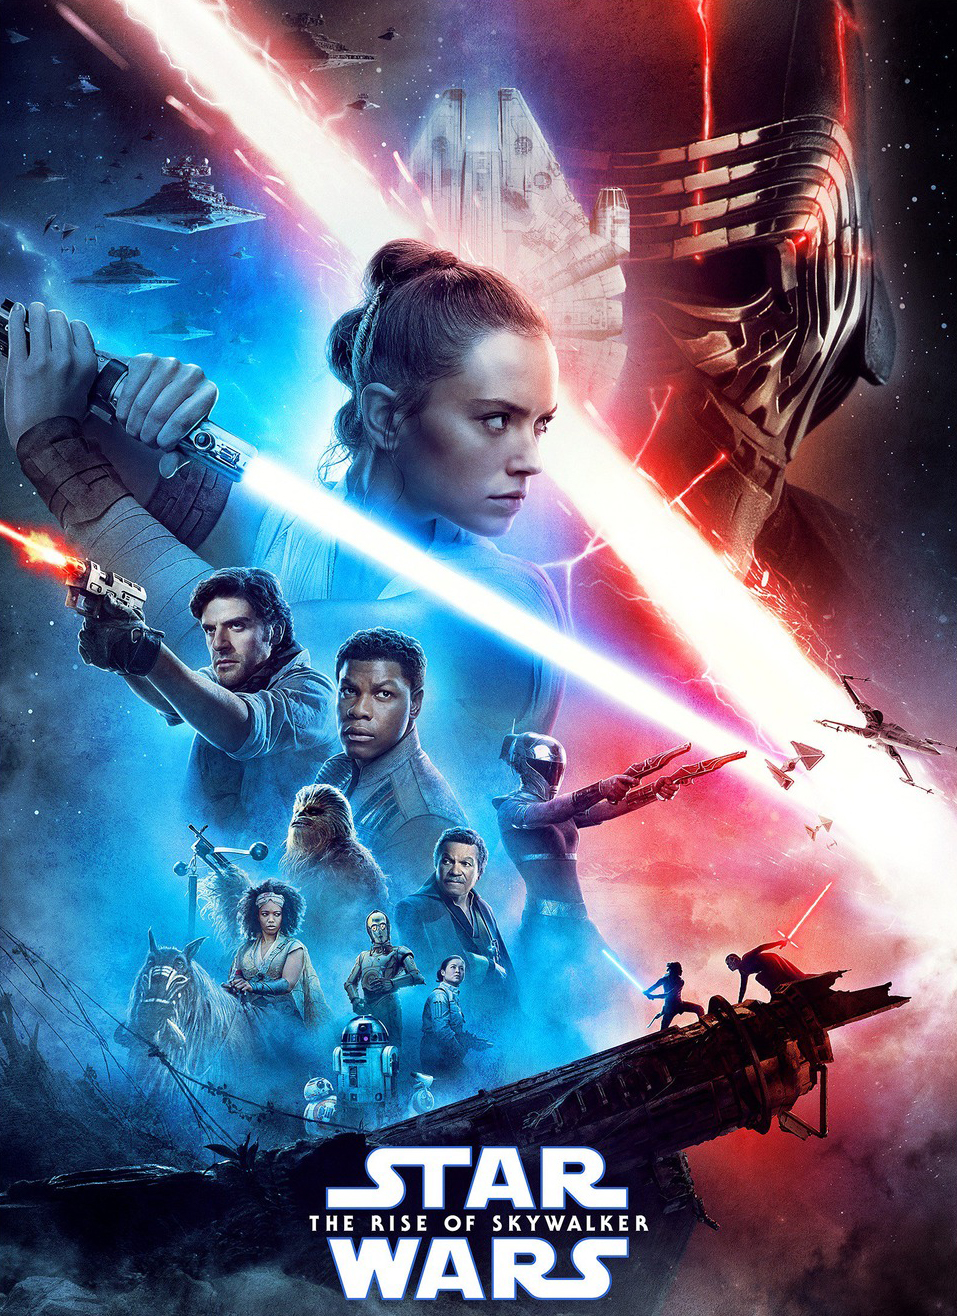 Star Wars: Episode IX – The Rise of Skywalker Film Review